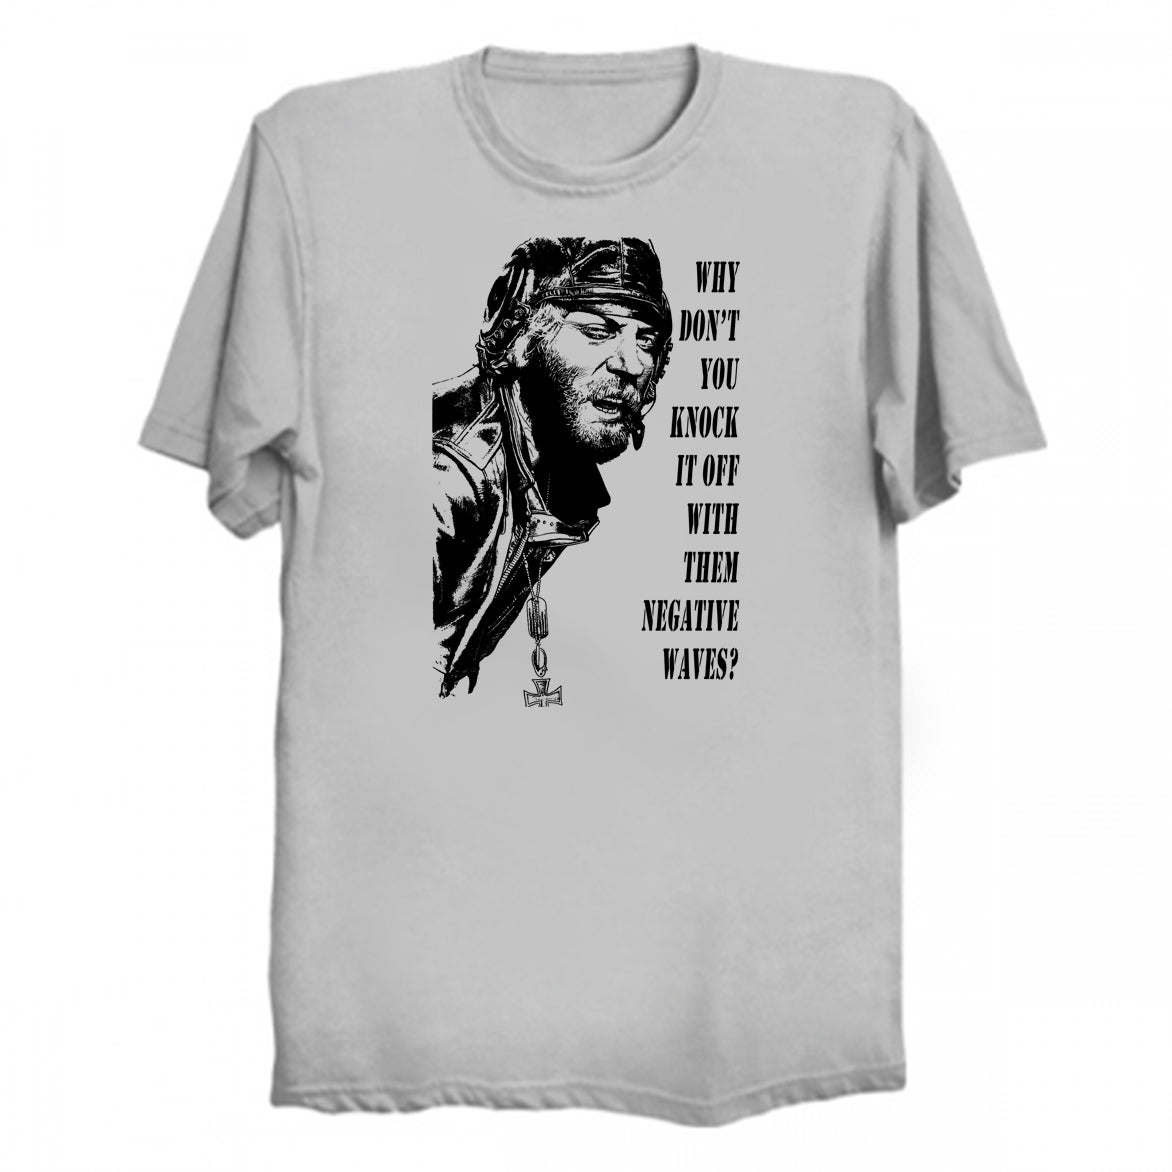 T-shirt featuring Oddball from the movie 1970 Kelly's Heroes, portrayed by Donald Sutherland